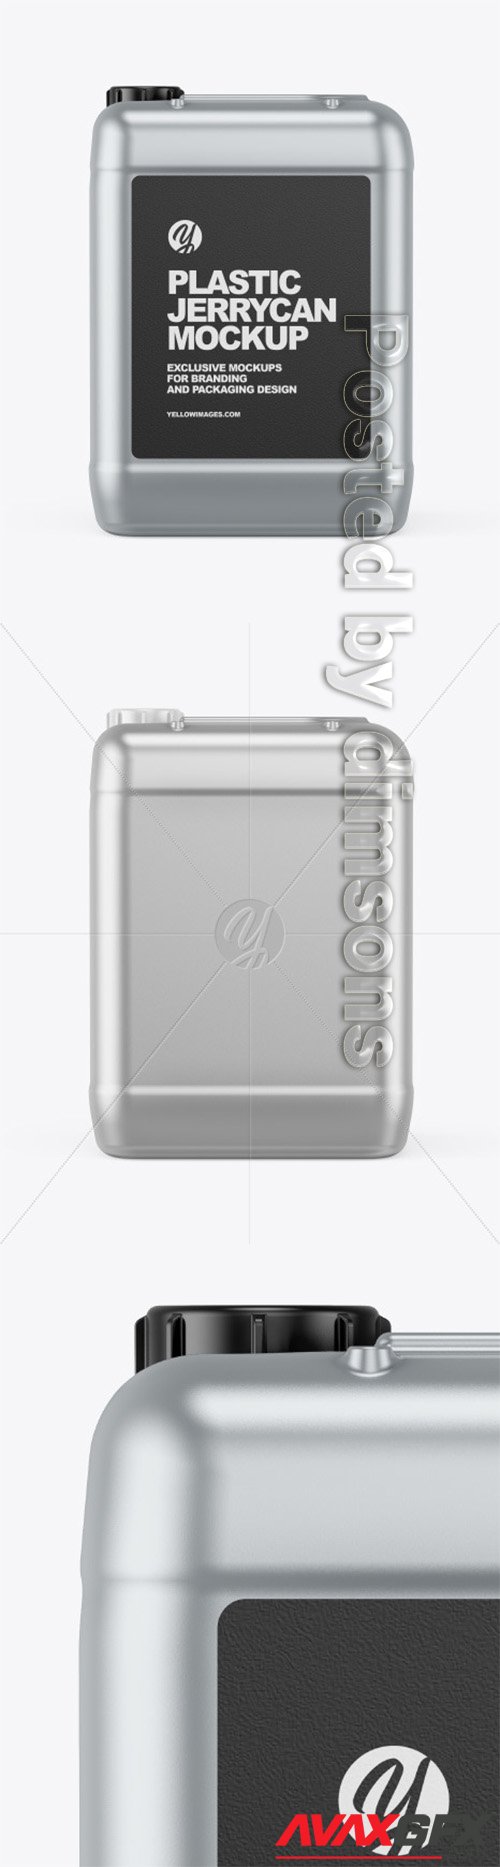 Download Plastic Jerrycan Mockup 64435 Avaxgfx All Downloads That You Need In One Place Graphic From Nitroflare Rapidgator Yellowimages Mockups